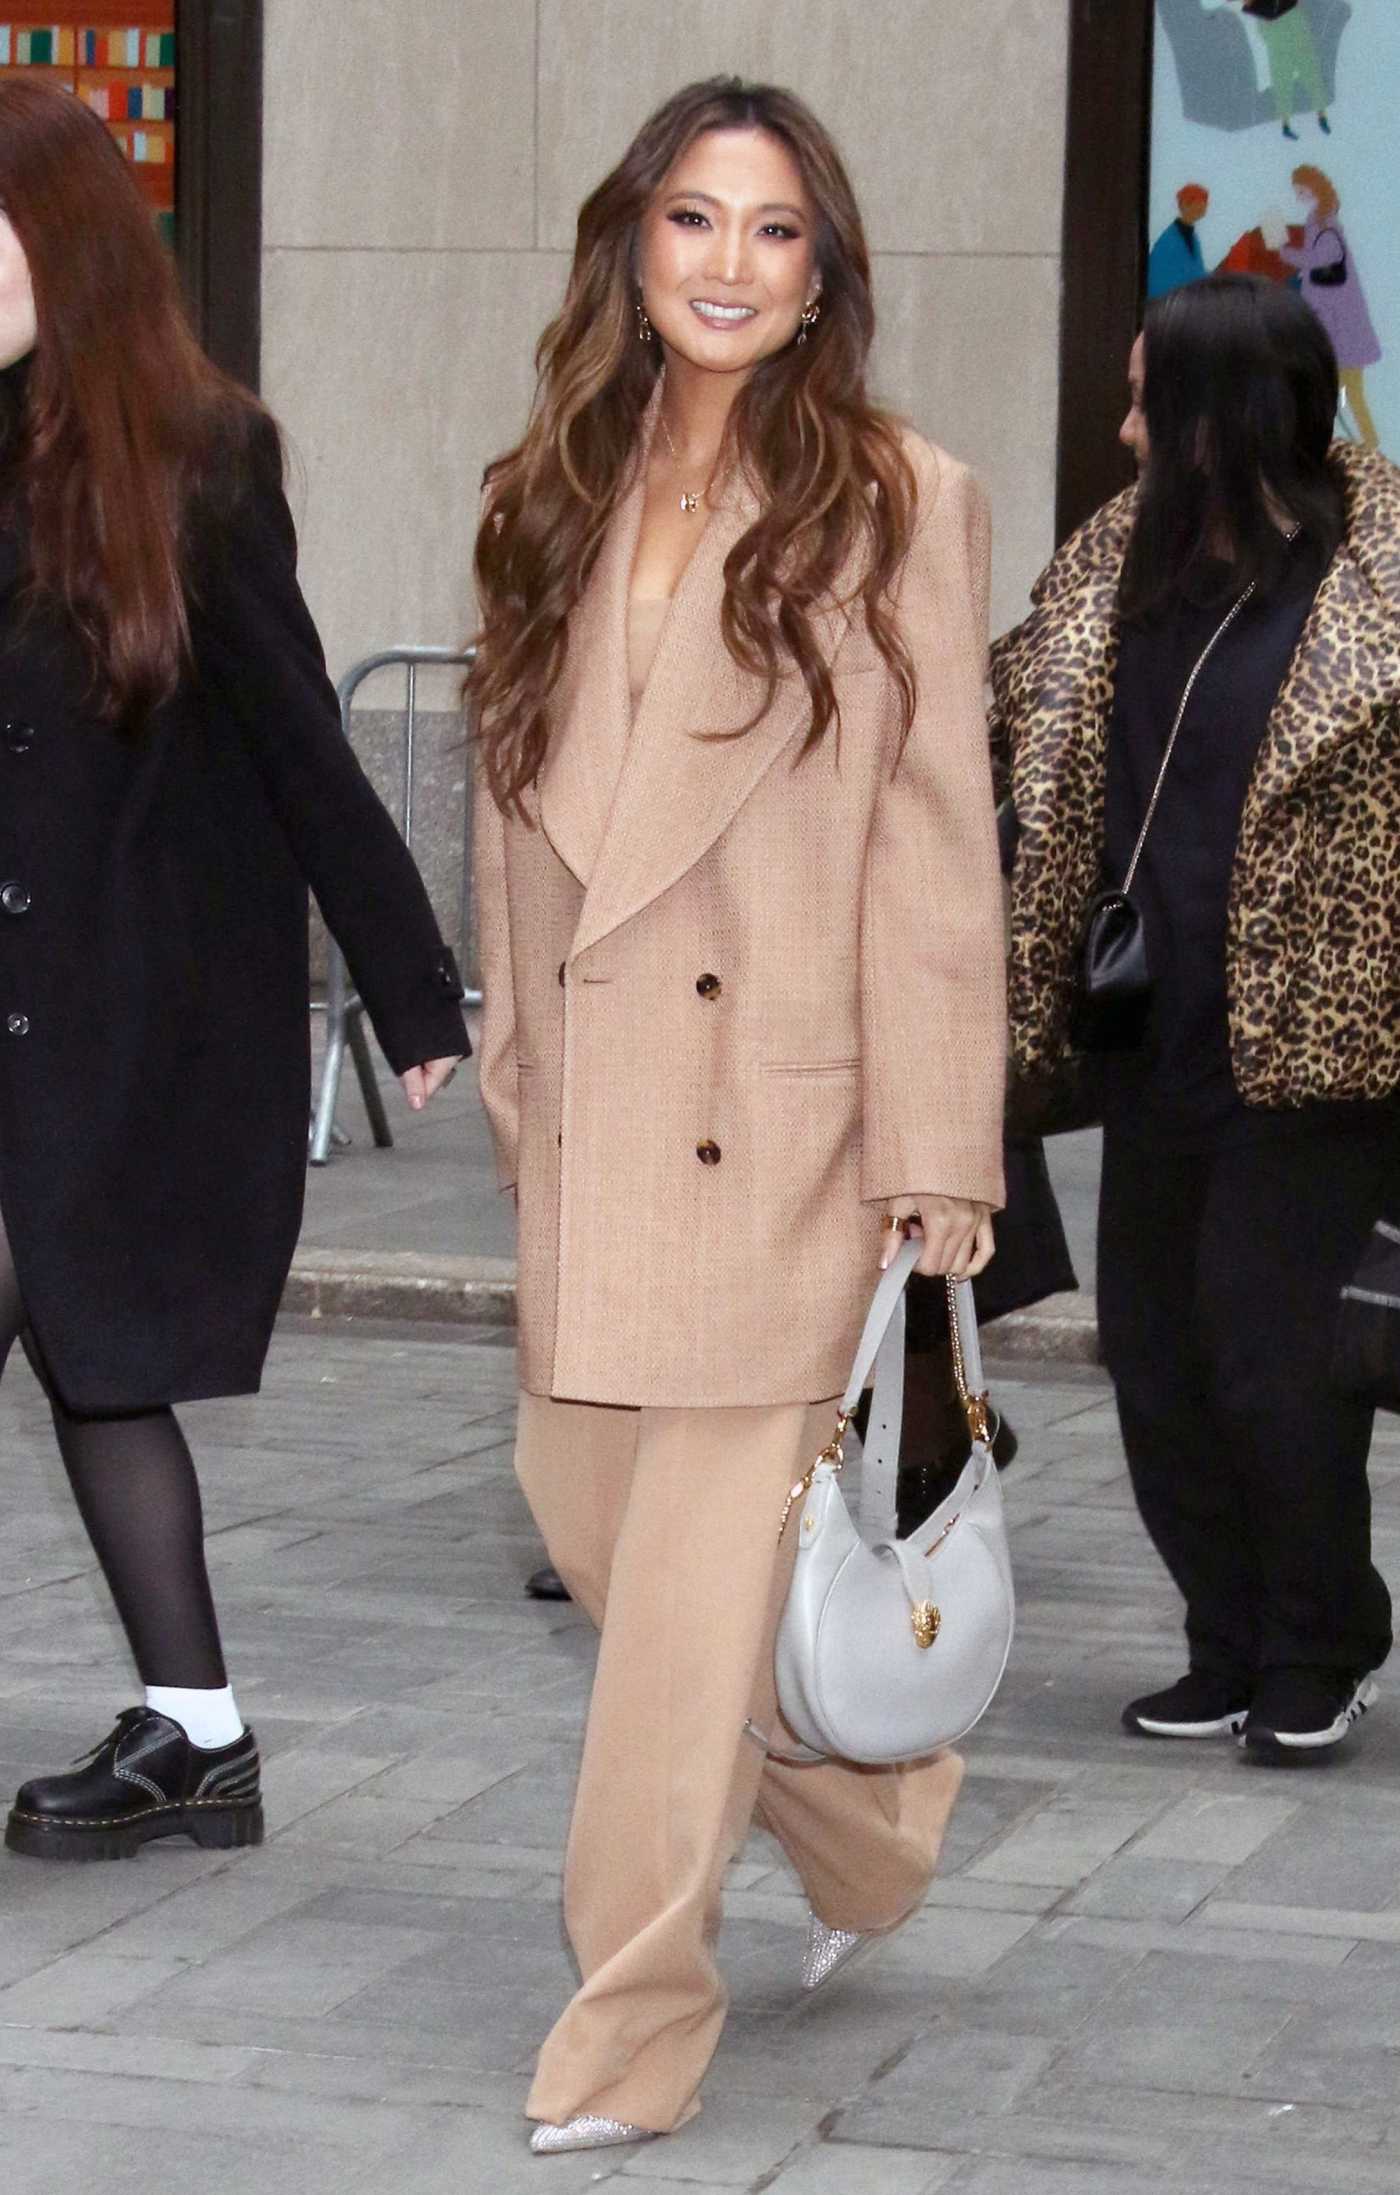 Ashley Park in a Beige Pantsuit Arrives at NBC's Today Show in New York 12/15/2022